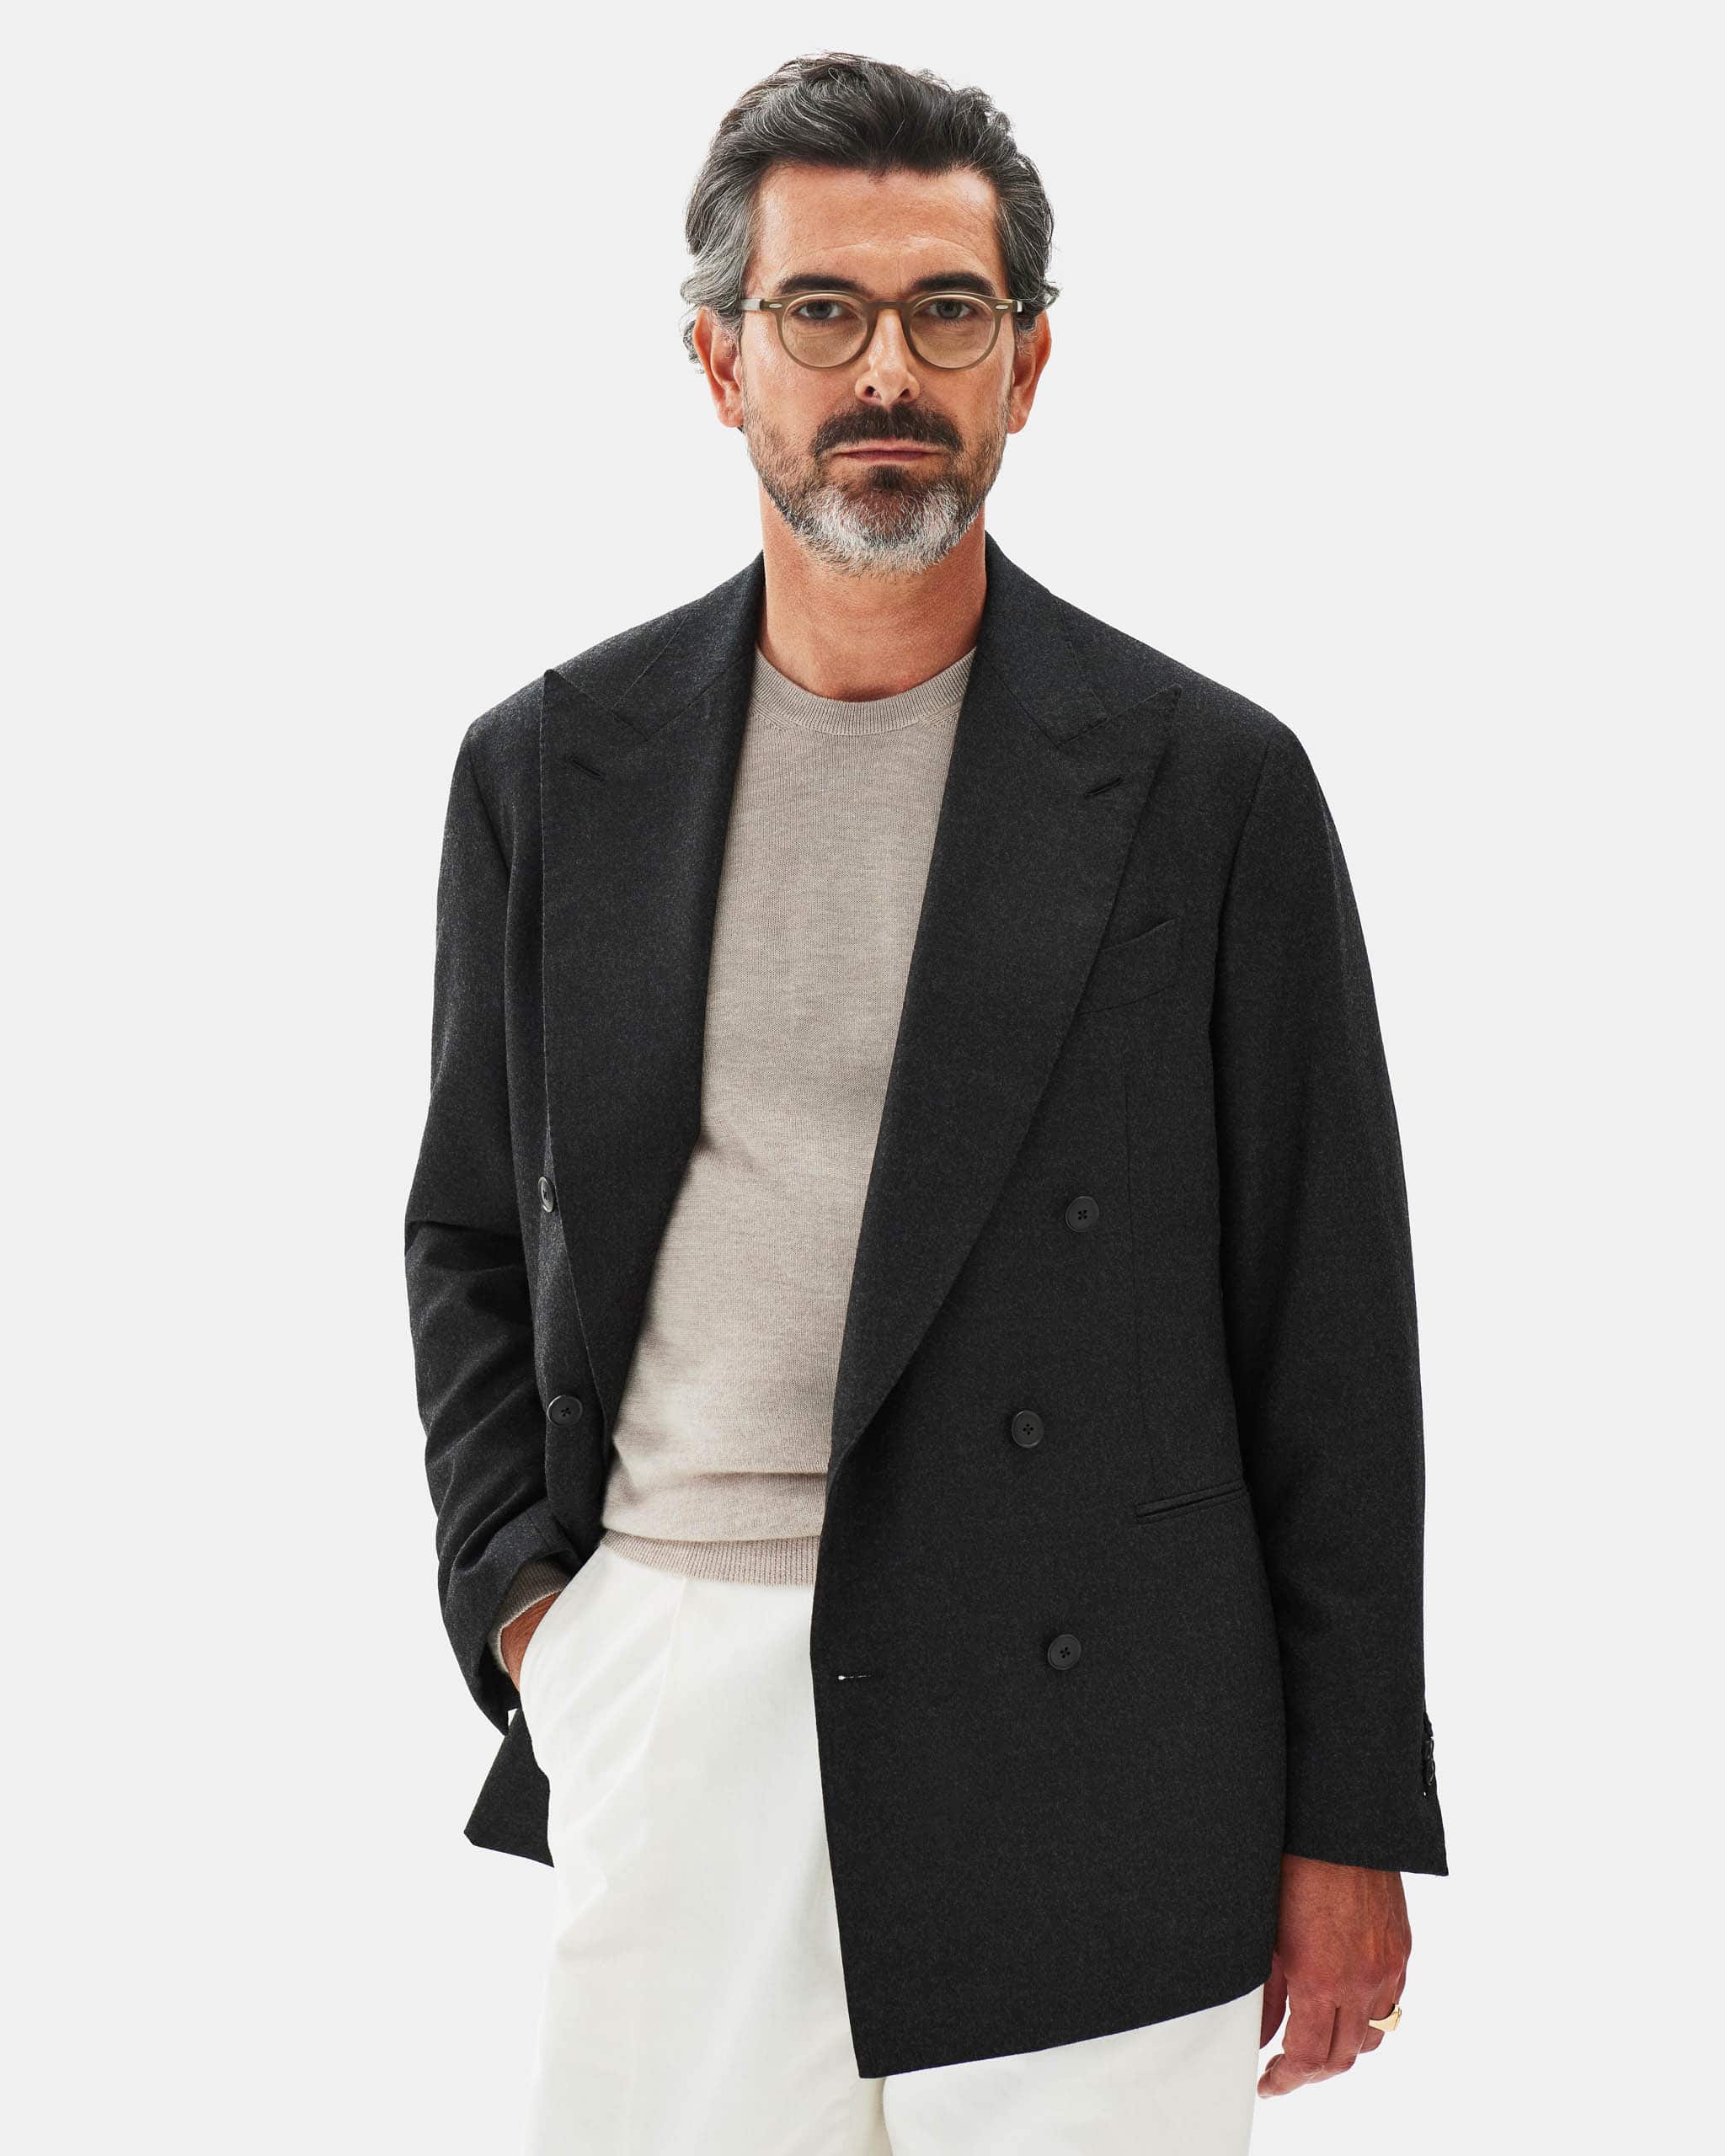 Jacket flannel wool & cashmere charcoal image 3